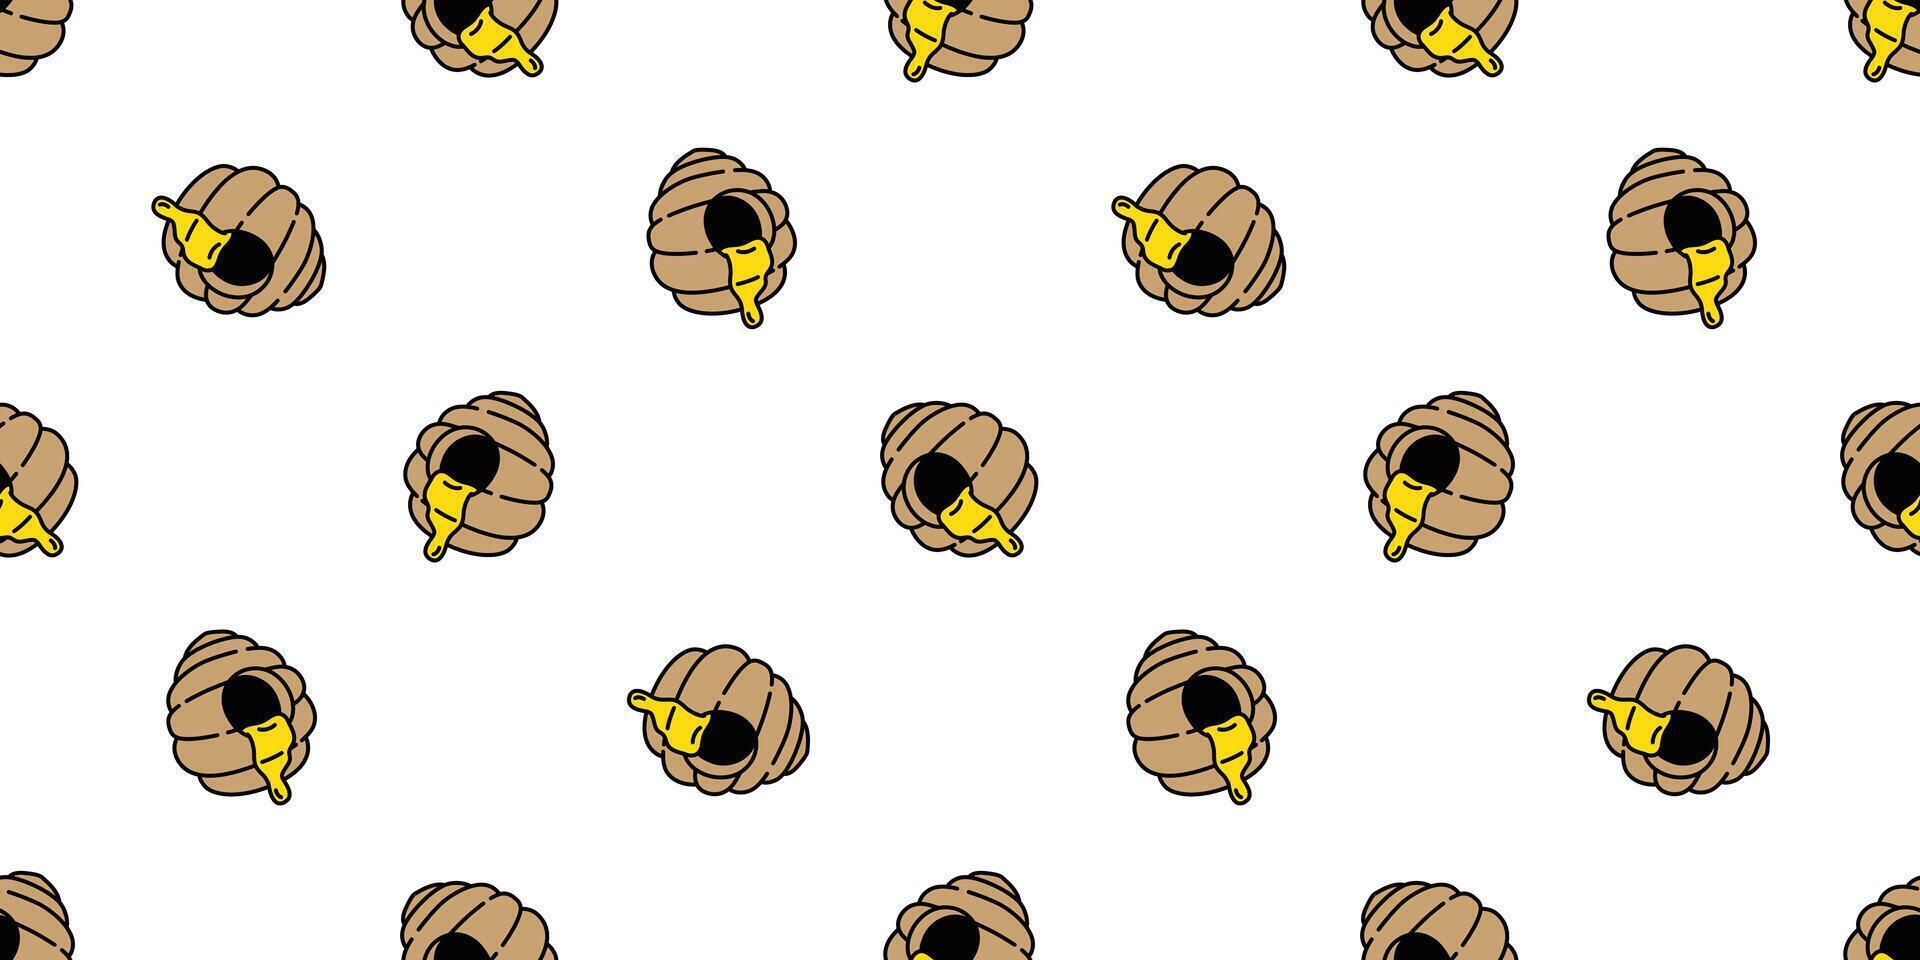 honey bee seamless pattern vector bear polar jam scarf isolated cartoon repeat background tile textured wallpaper textile illustration doodle white design